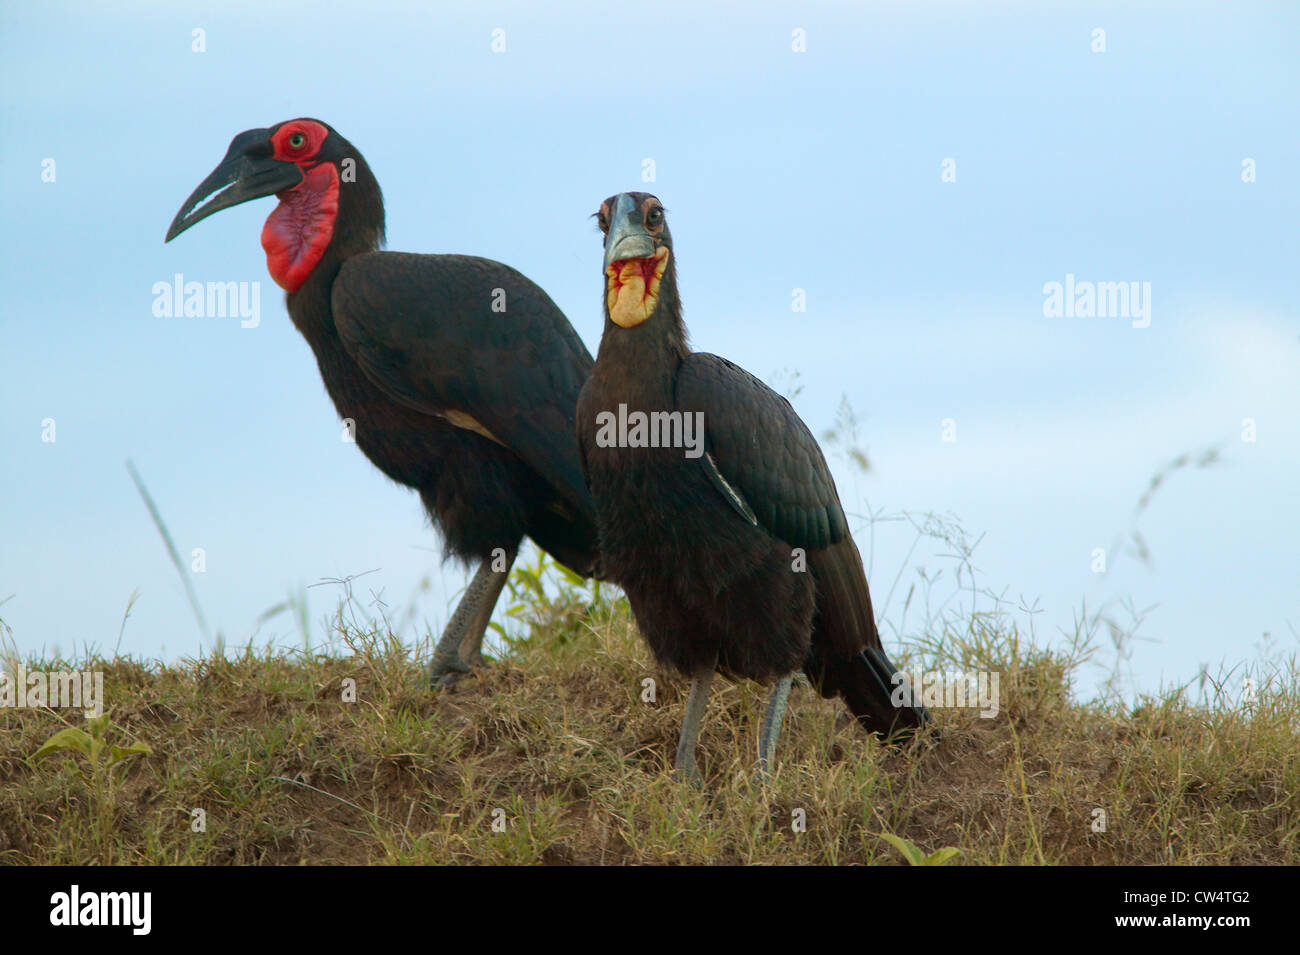 Ground Horn Bill birds with red neck in Masai Mara near Little Governor's camp in Kenya, Africa Stock Photo